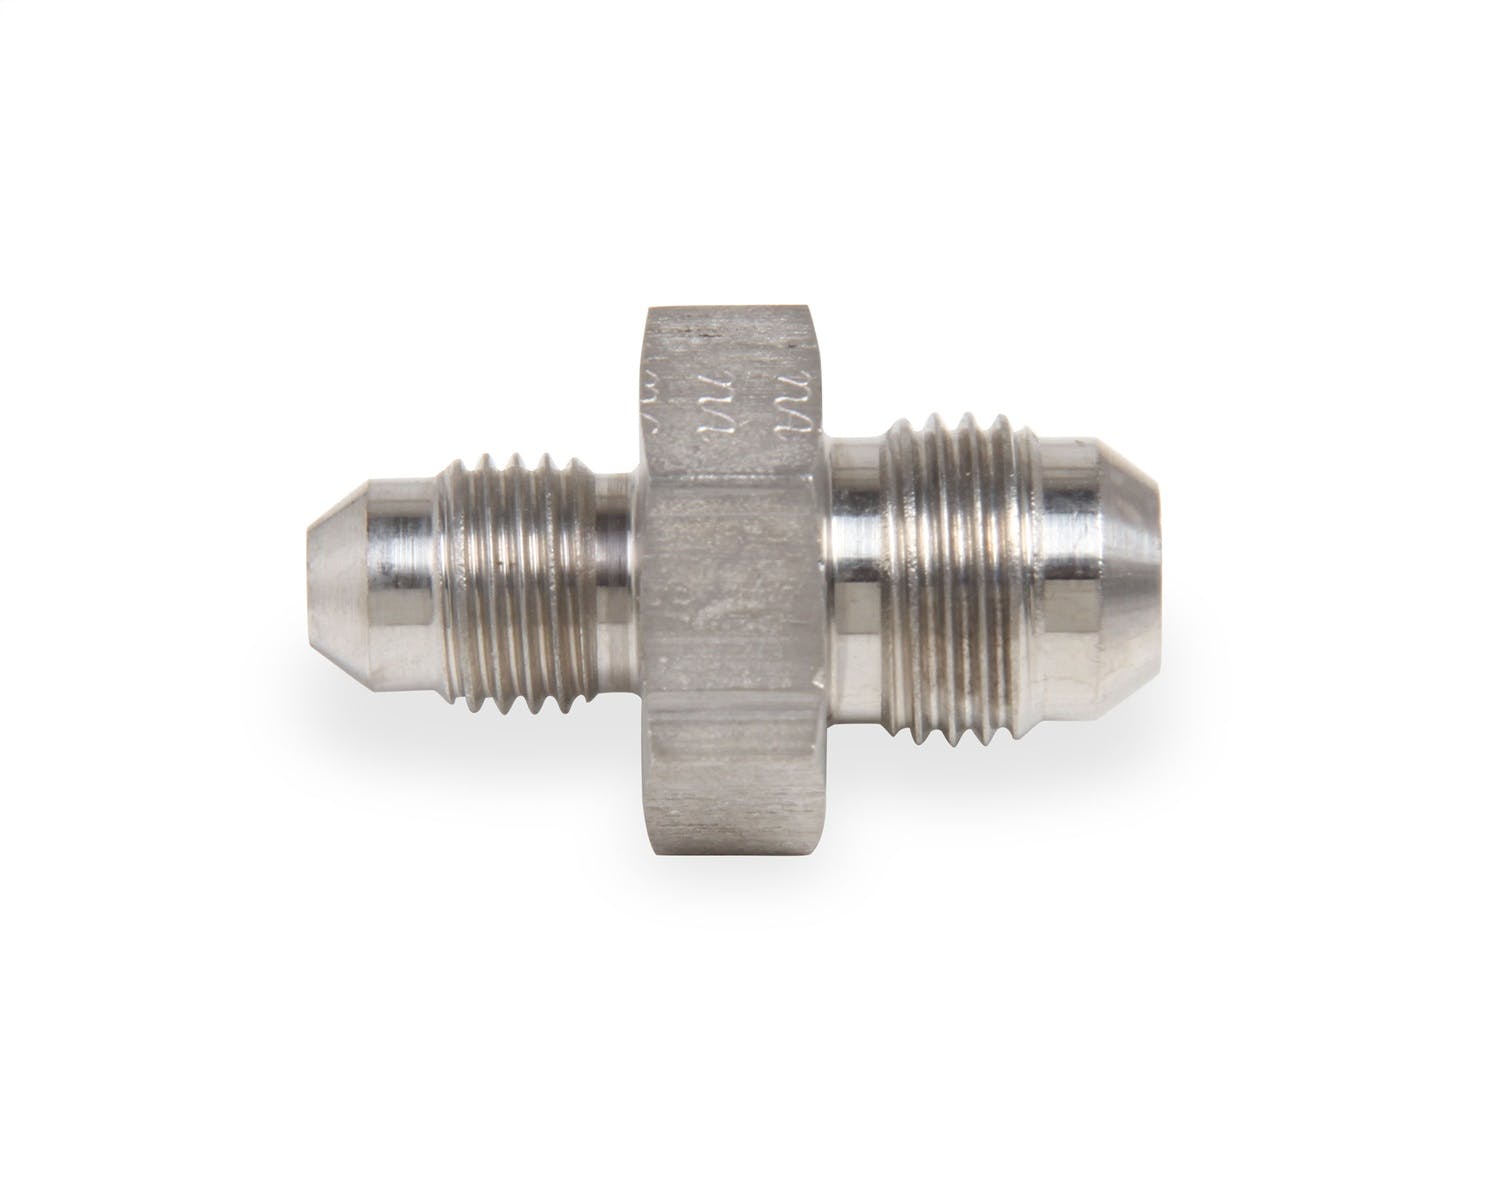 Earl's Performance Plumbing SS991912ERL -6 TO -8 UNION  STAINLESS STEEL